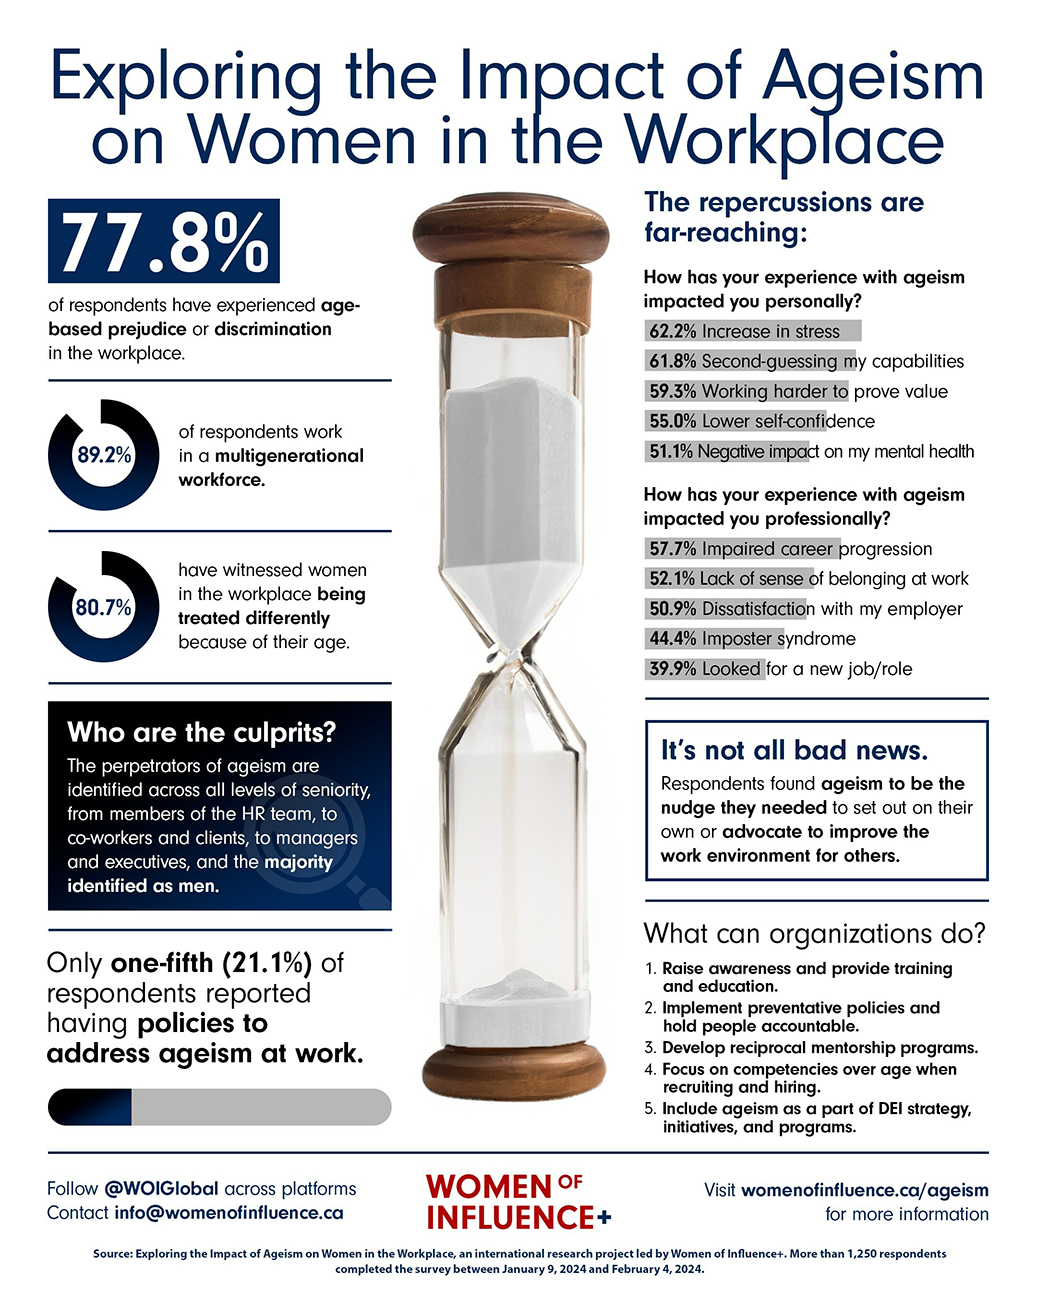 Women of Influence+, a leading global organization committed to advancing gender equity in the workplace, released its groundbreaking findings from its survey, "Exploring the Impact of Ageism on Women in the Workplace."